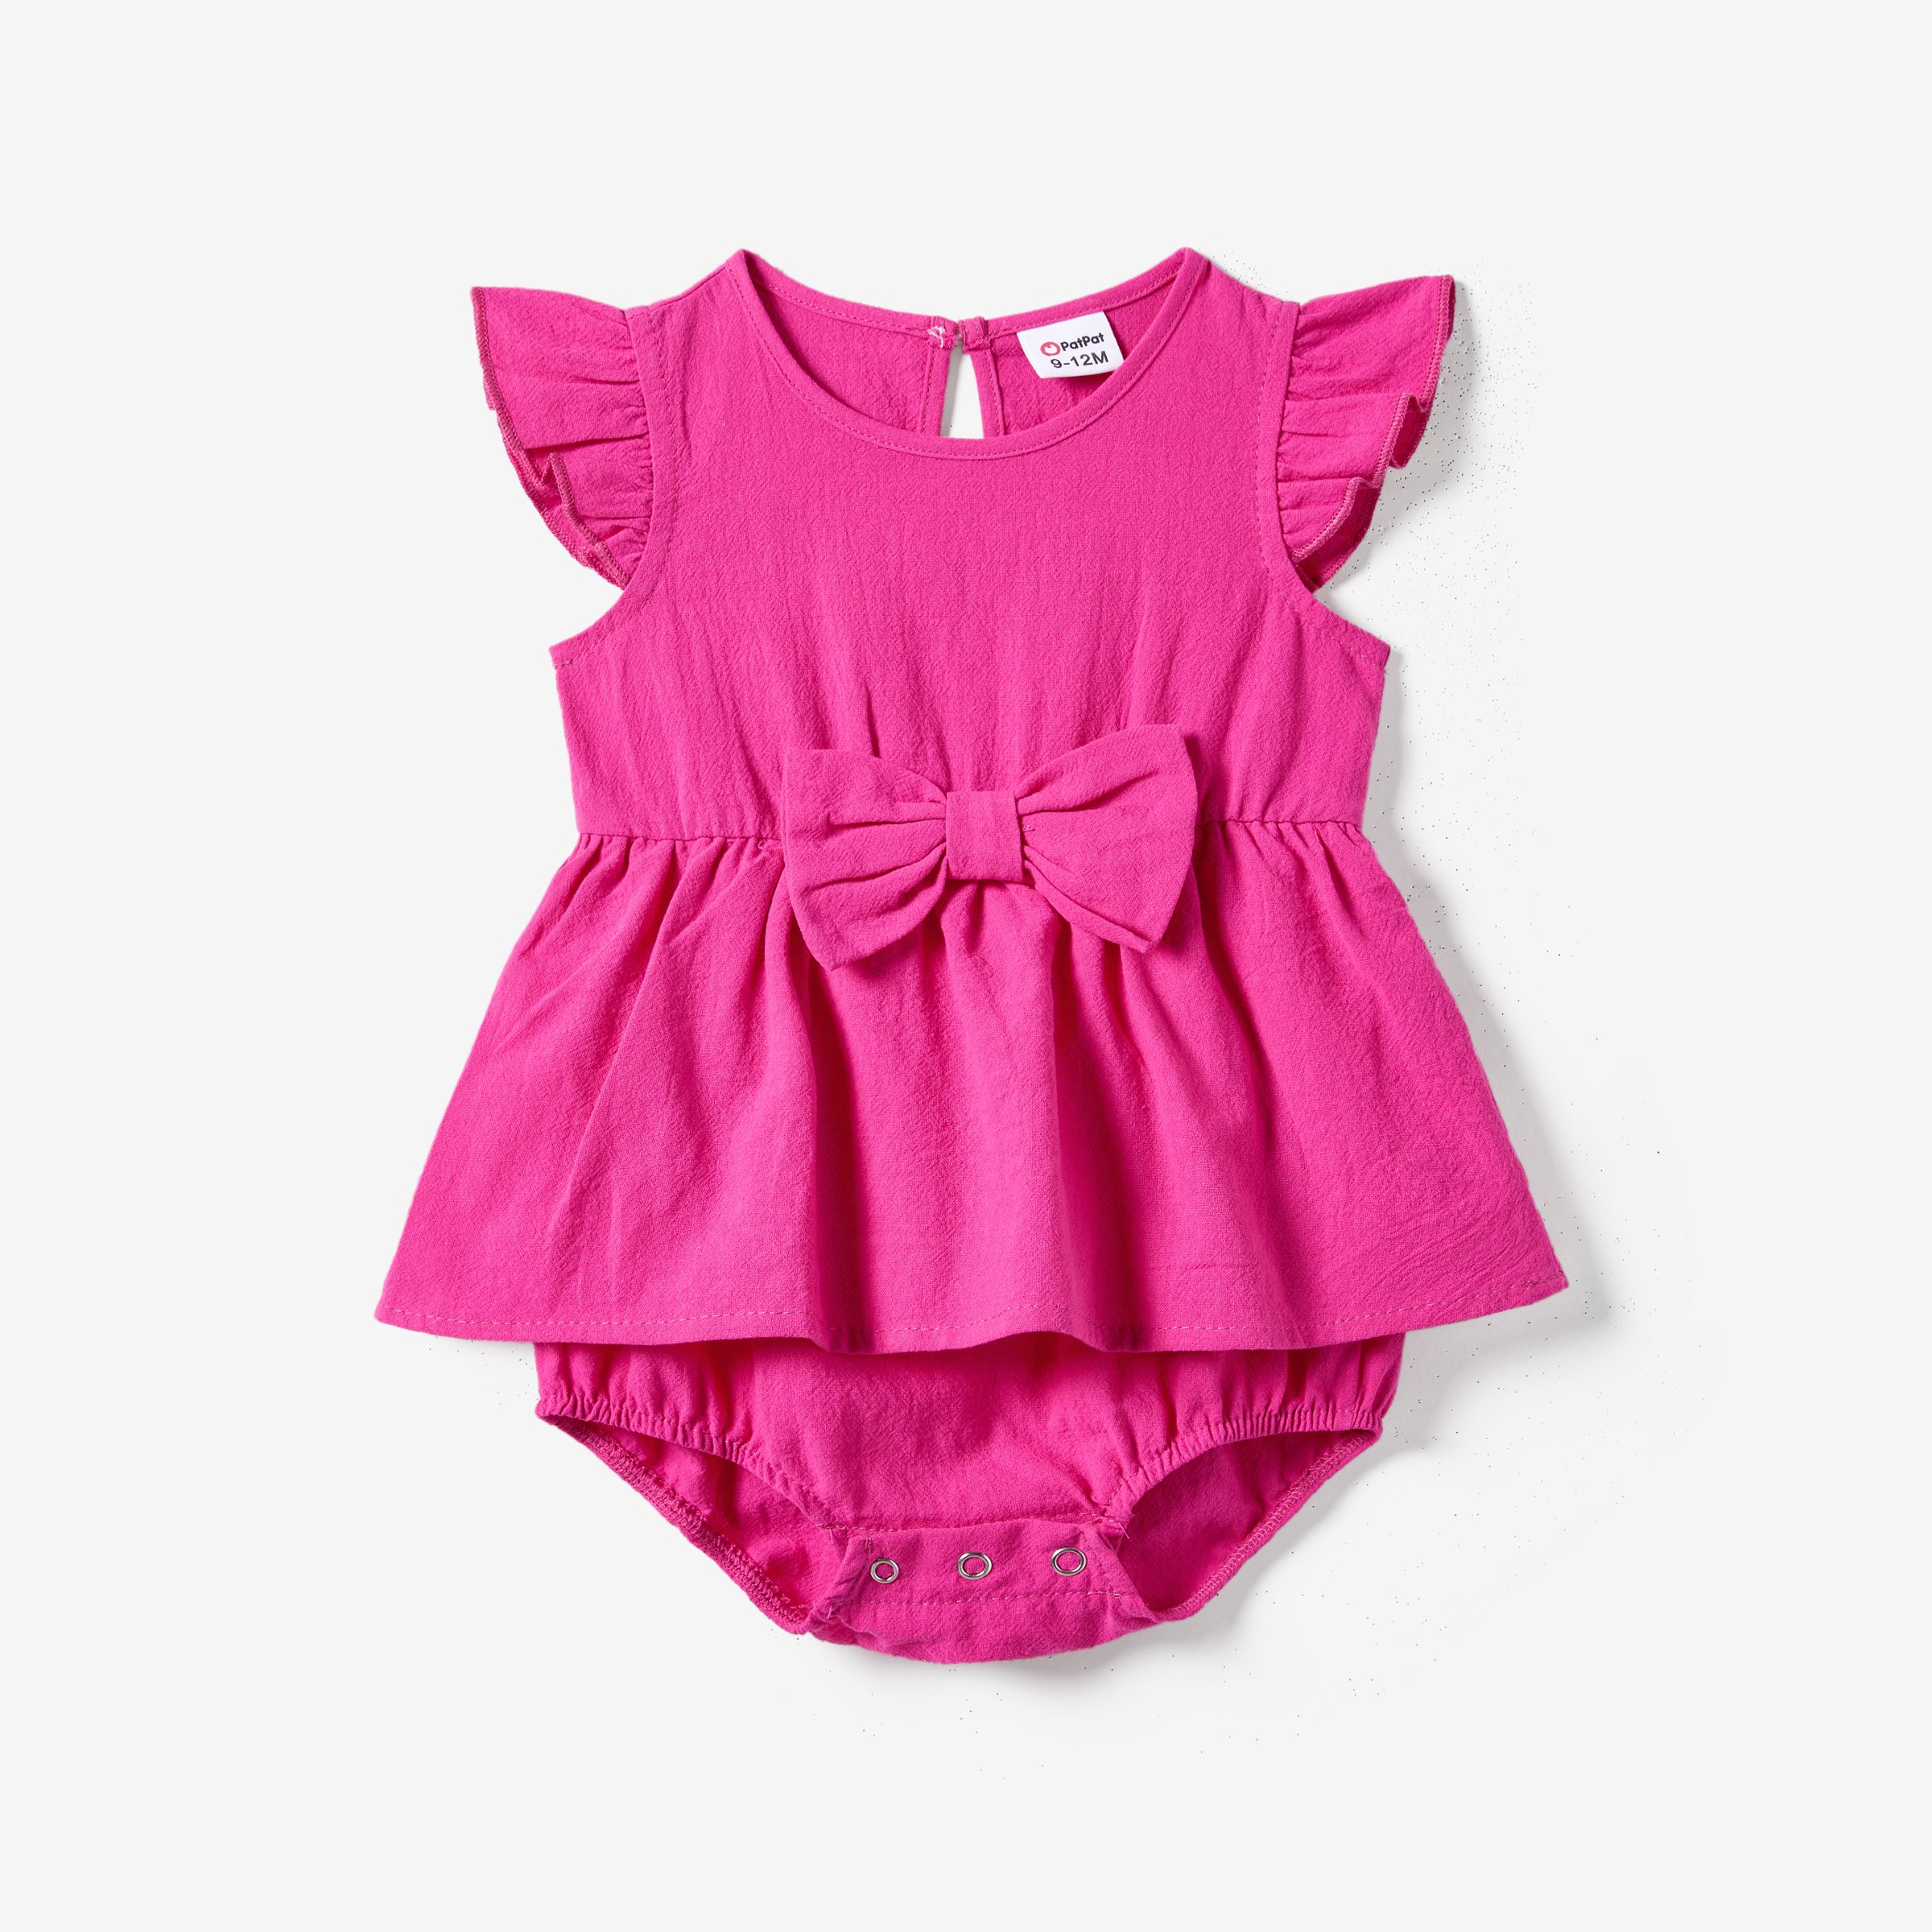 Family Matching Colorblock T-shirt And Hot Pink Button Neck-Tie Strap Dress Sets